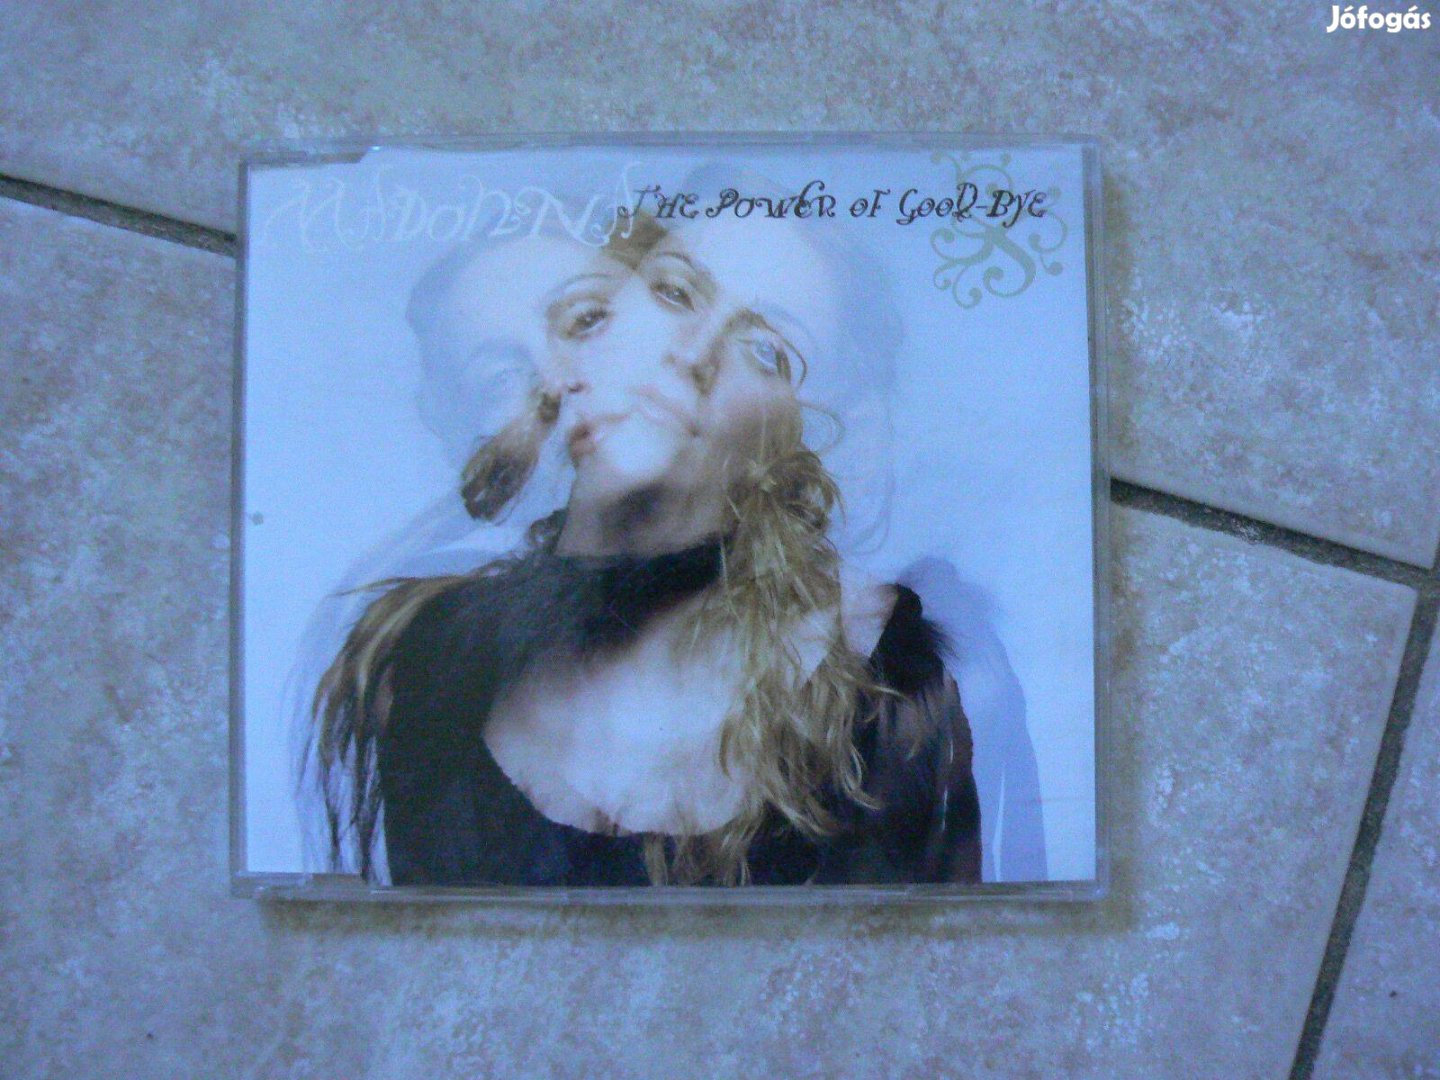 Madonna The power of good bye maxi CD